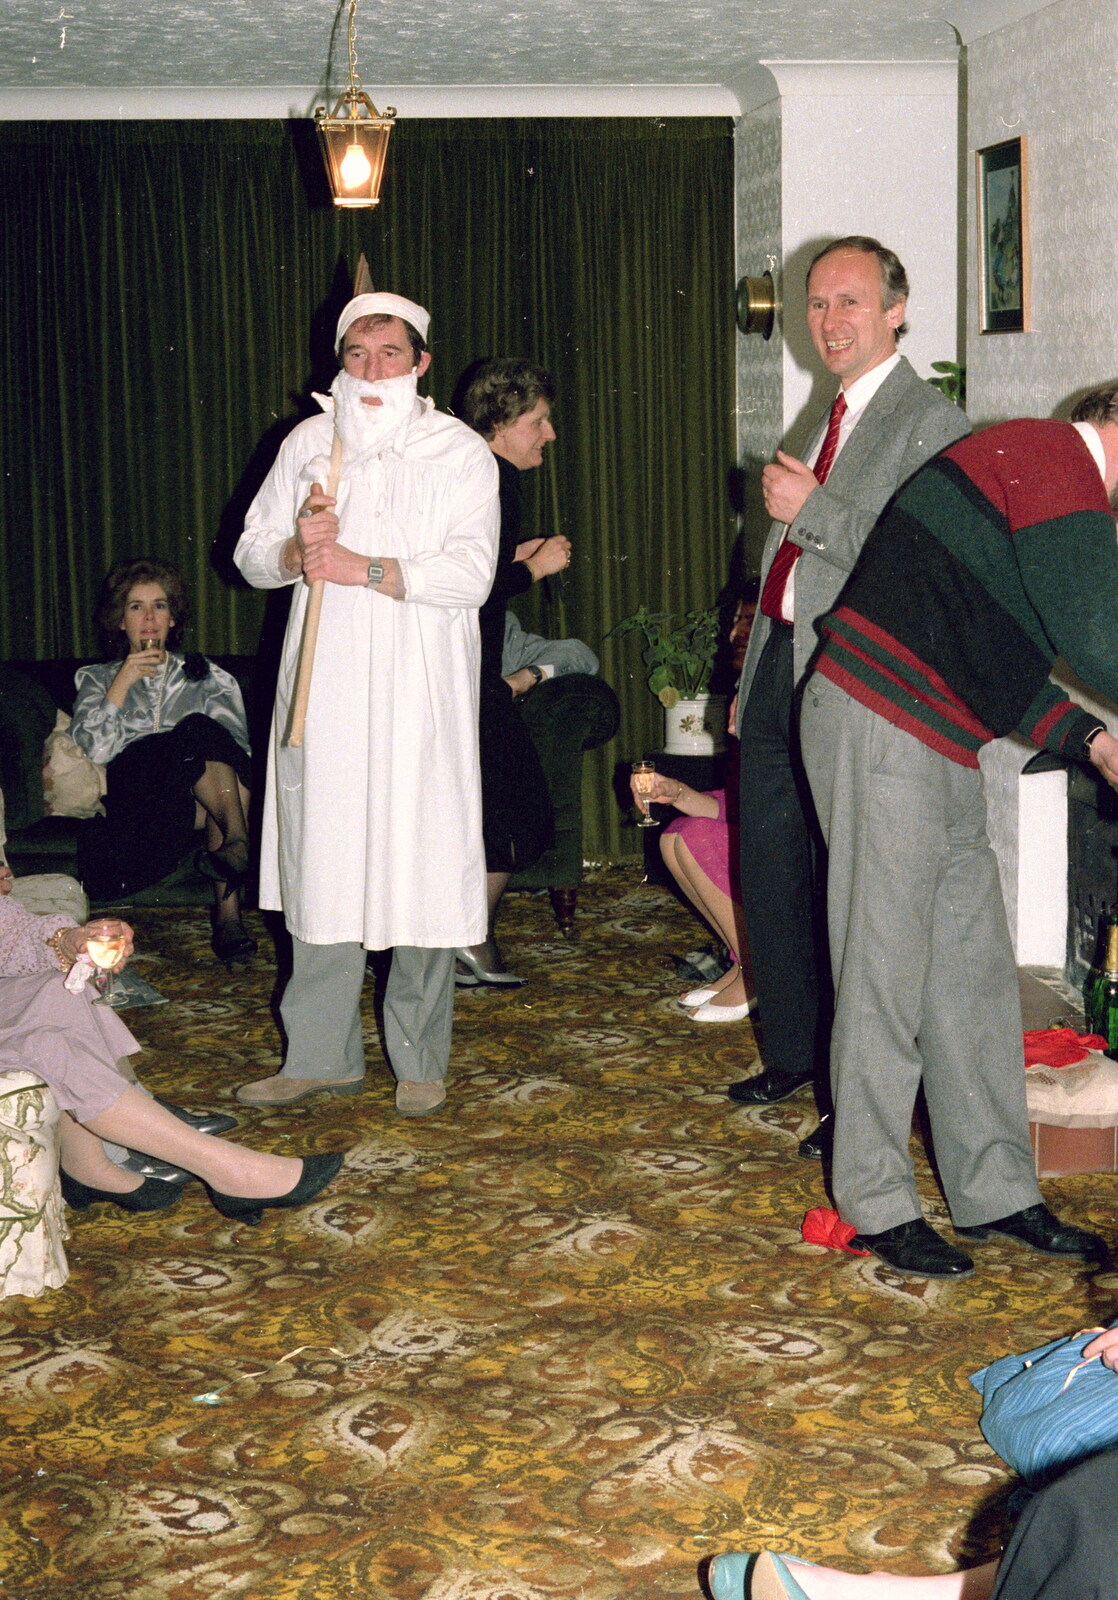 'Father Time' makes an appearance from New Year's Eve at Anna's, Walkford, Dorset - 31st December 1985